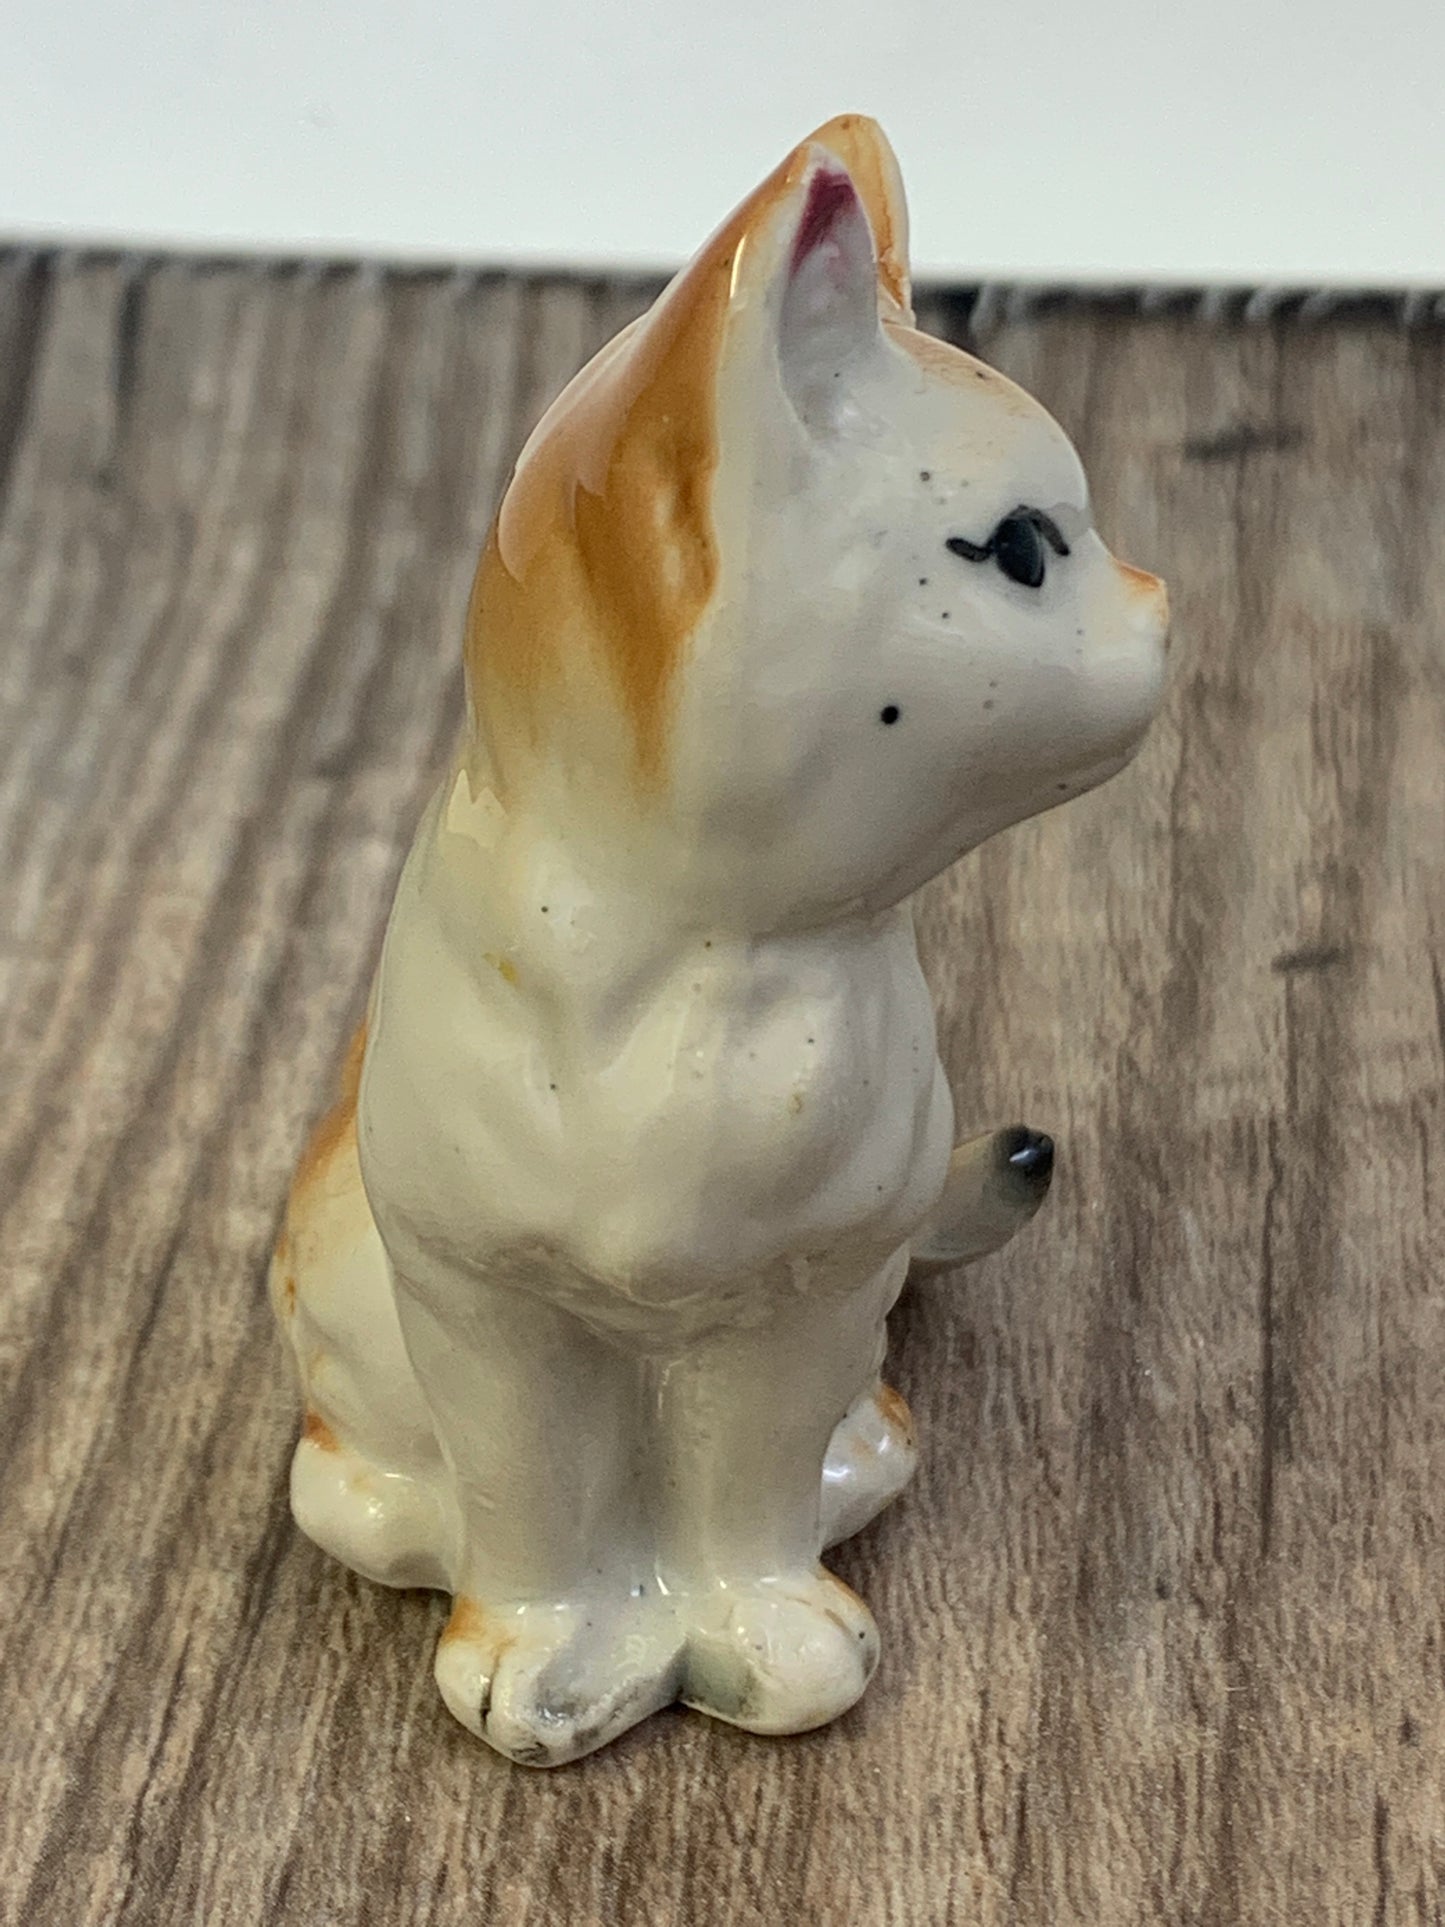 Miniature Cat Figurine Long Haired Cat Orange and White Cat Vintage Home Decor Small Cat Figurine